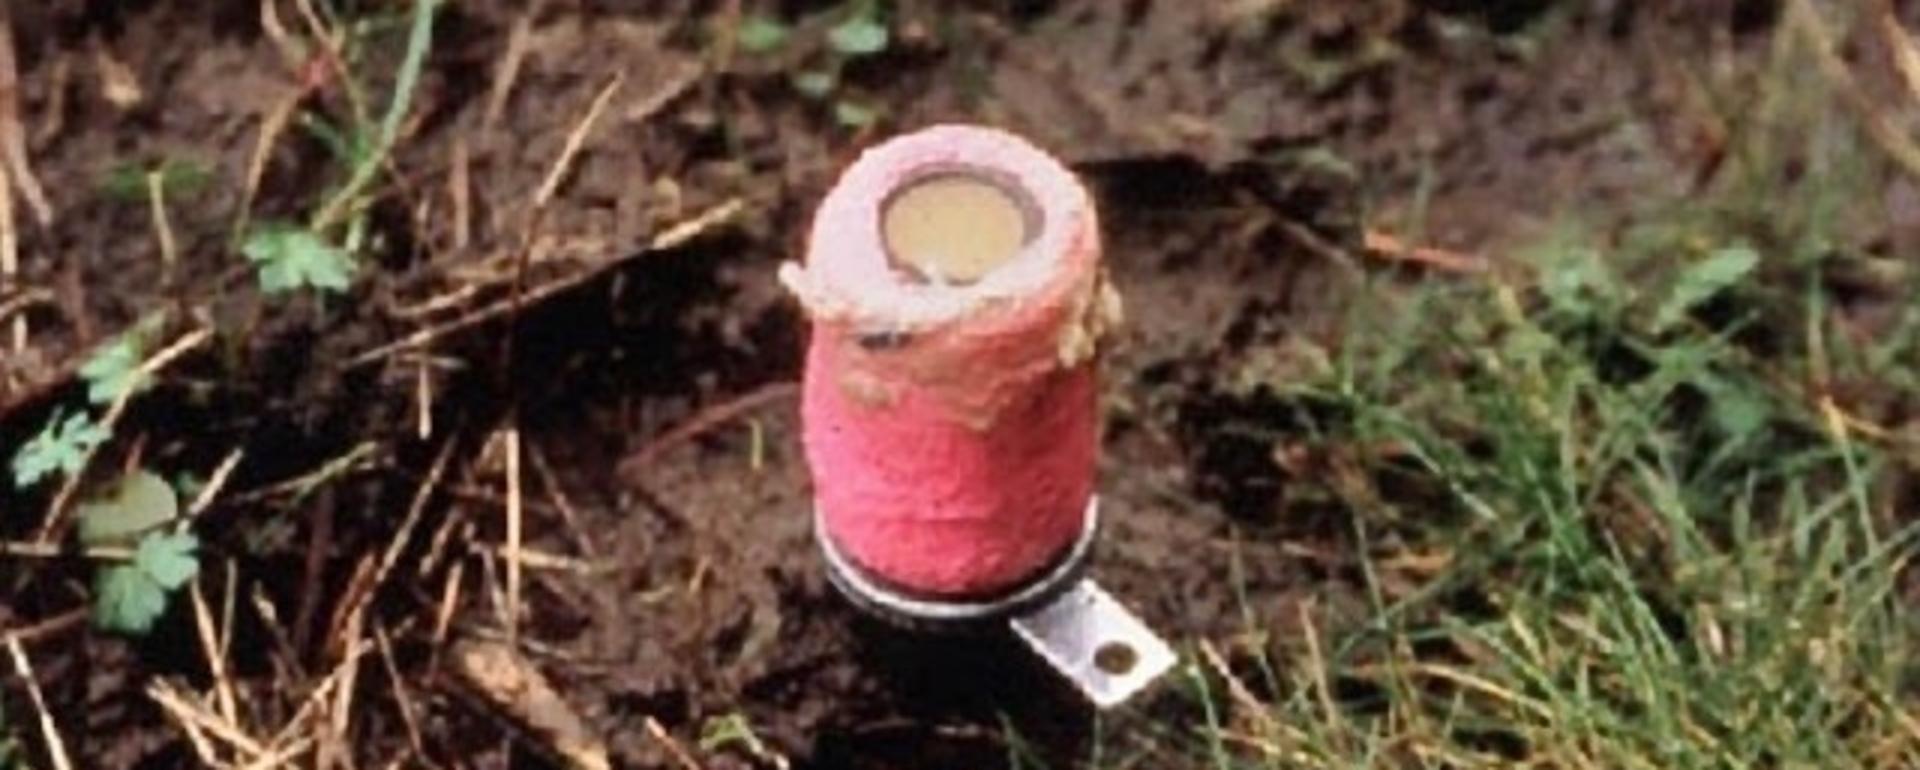 A Wildlife Services 'cyanide bomb'